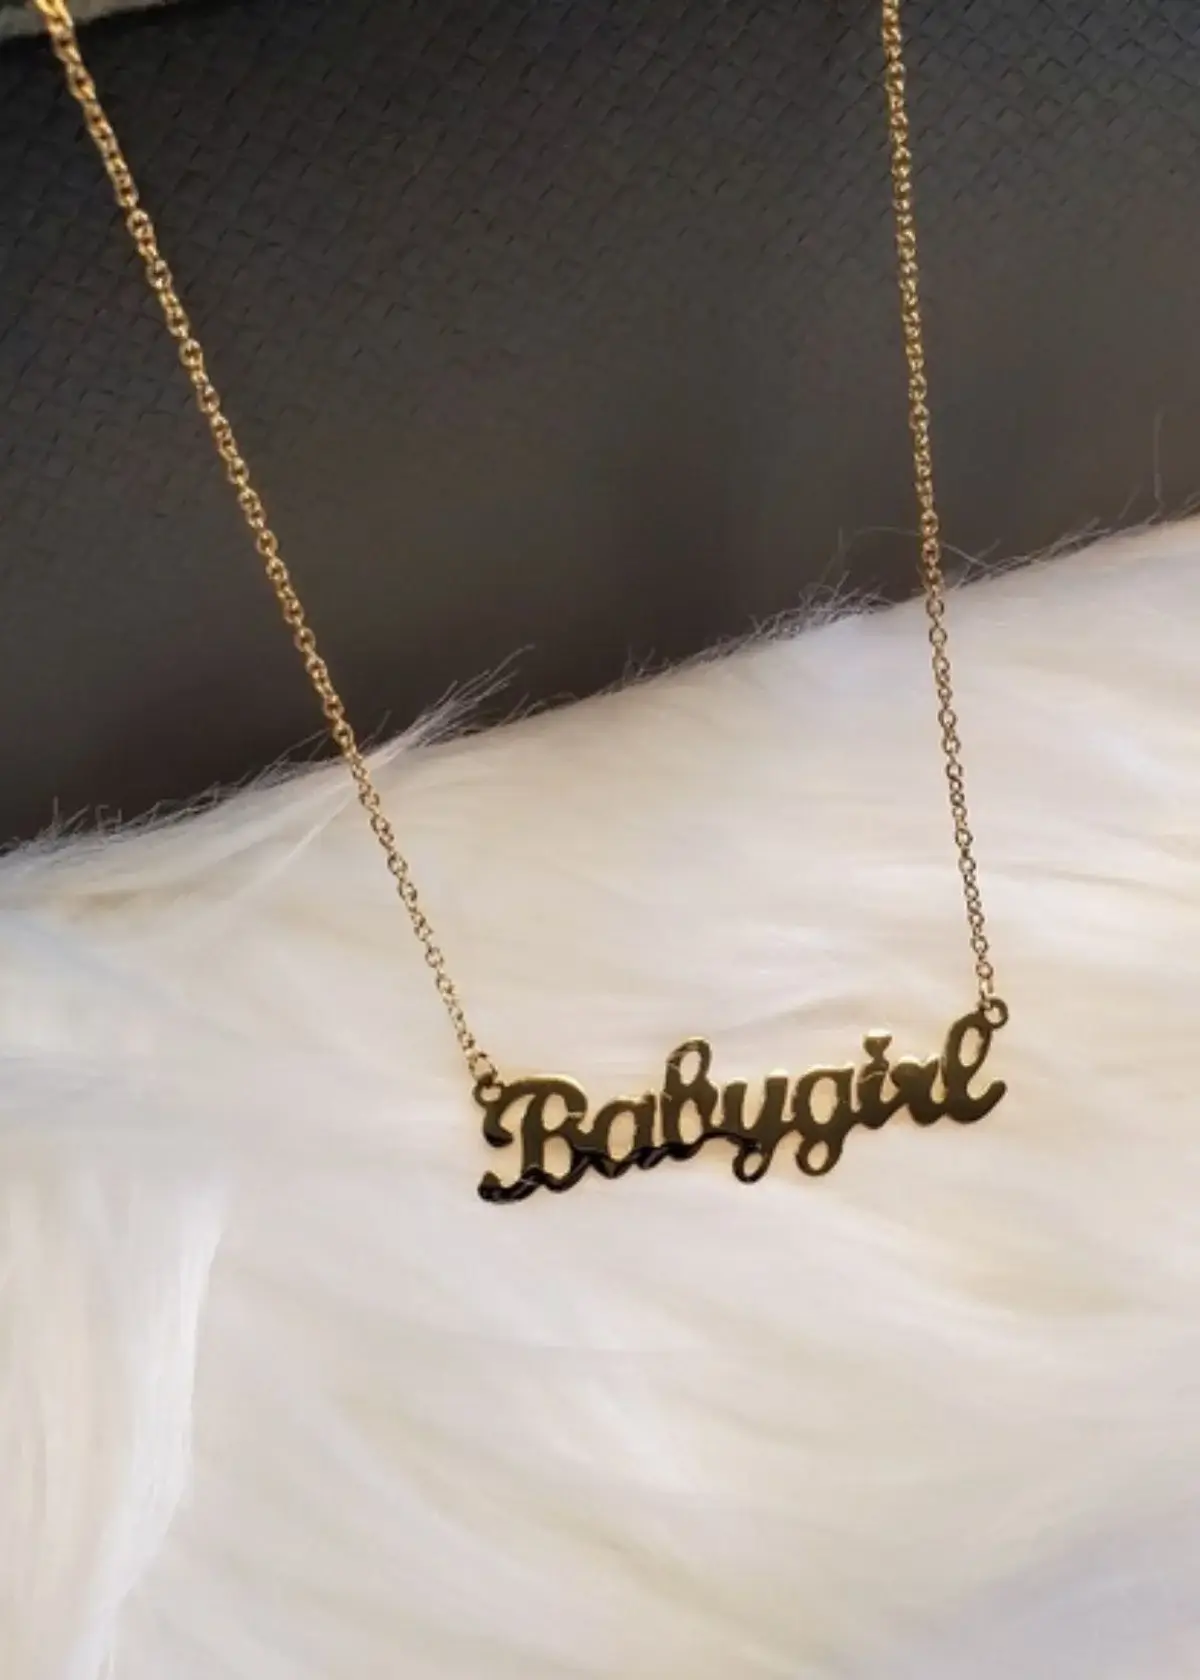 How to choose the right babygirl necklace?